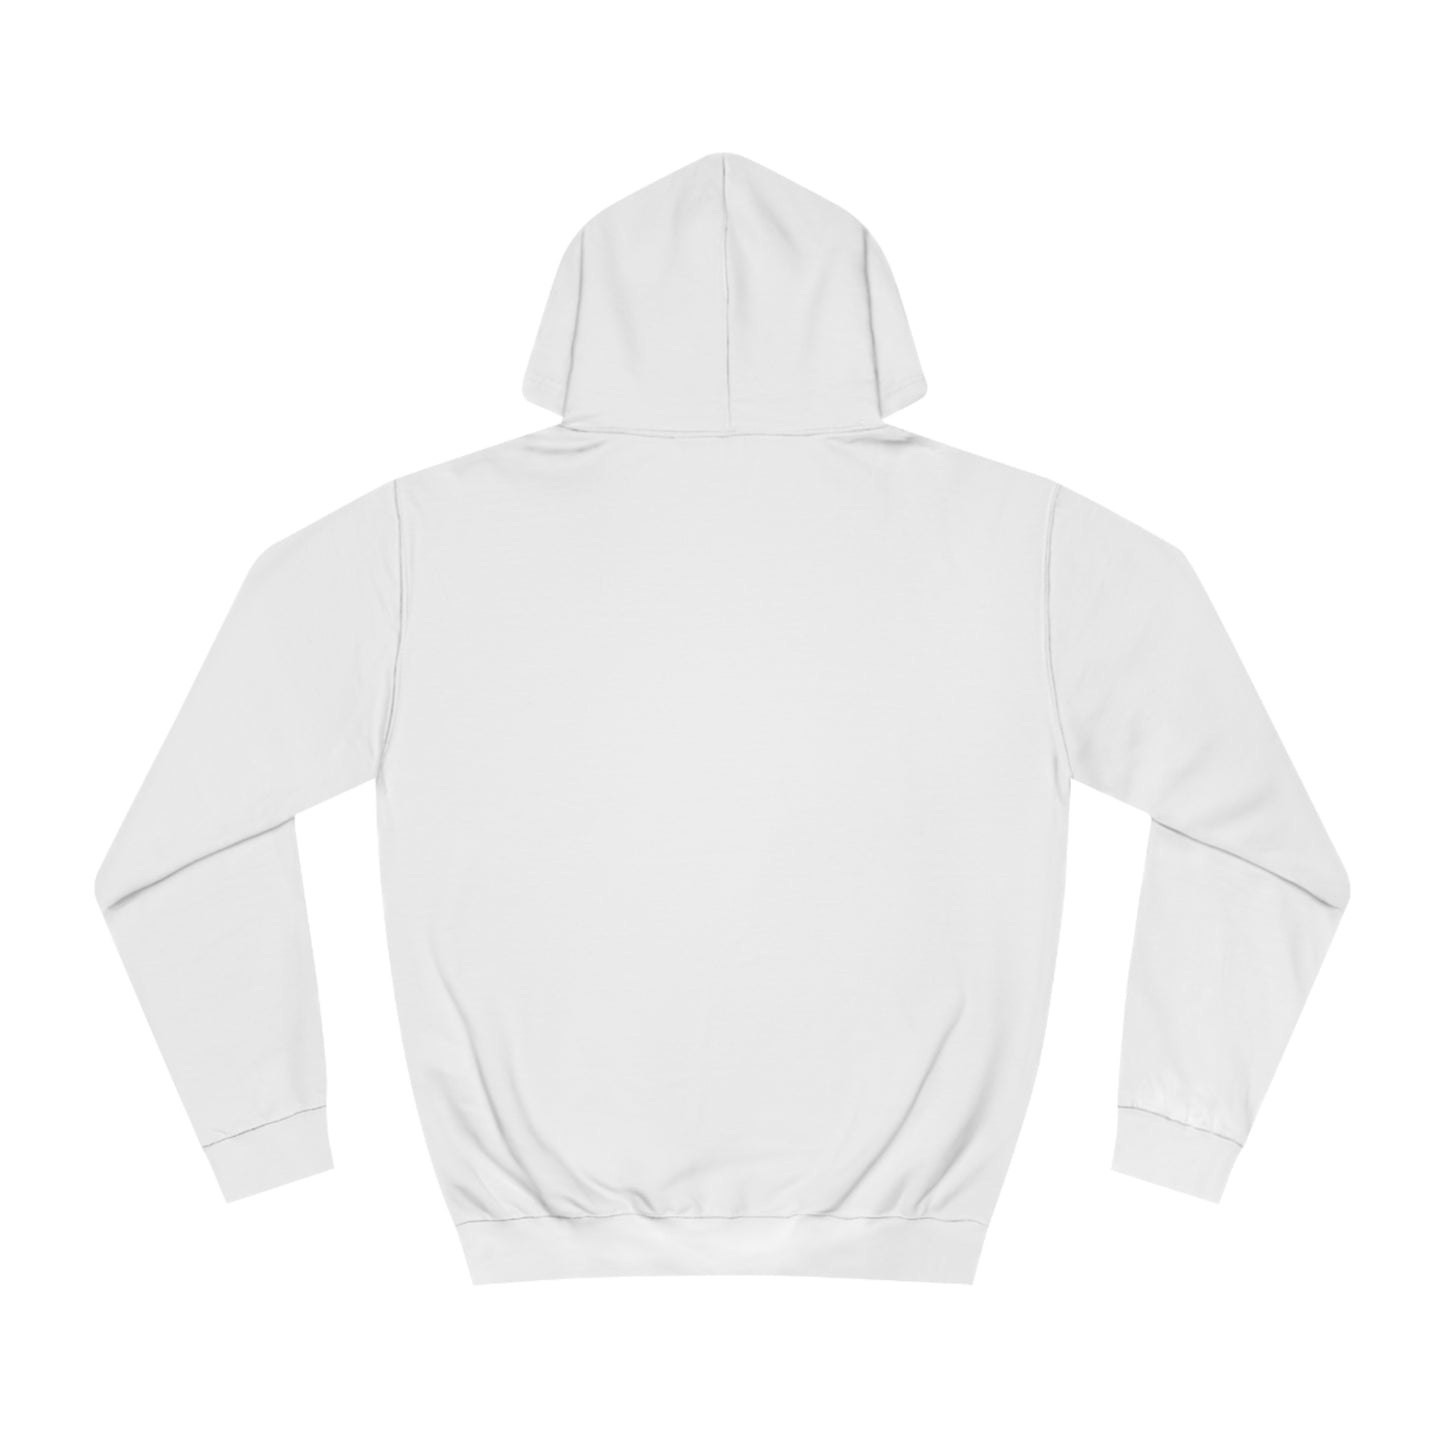 MN collection hoodie